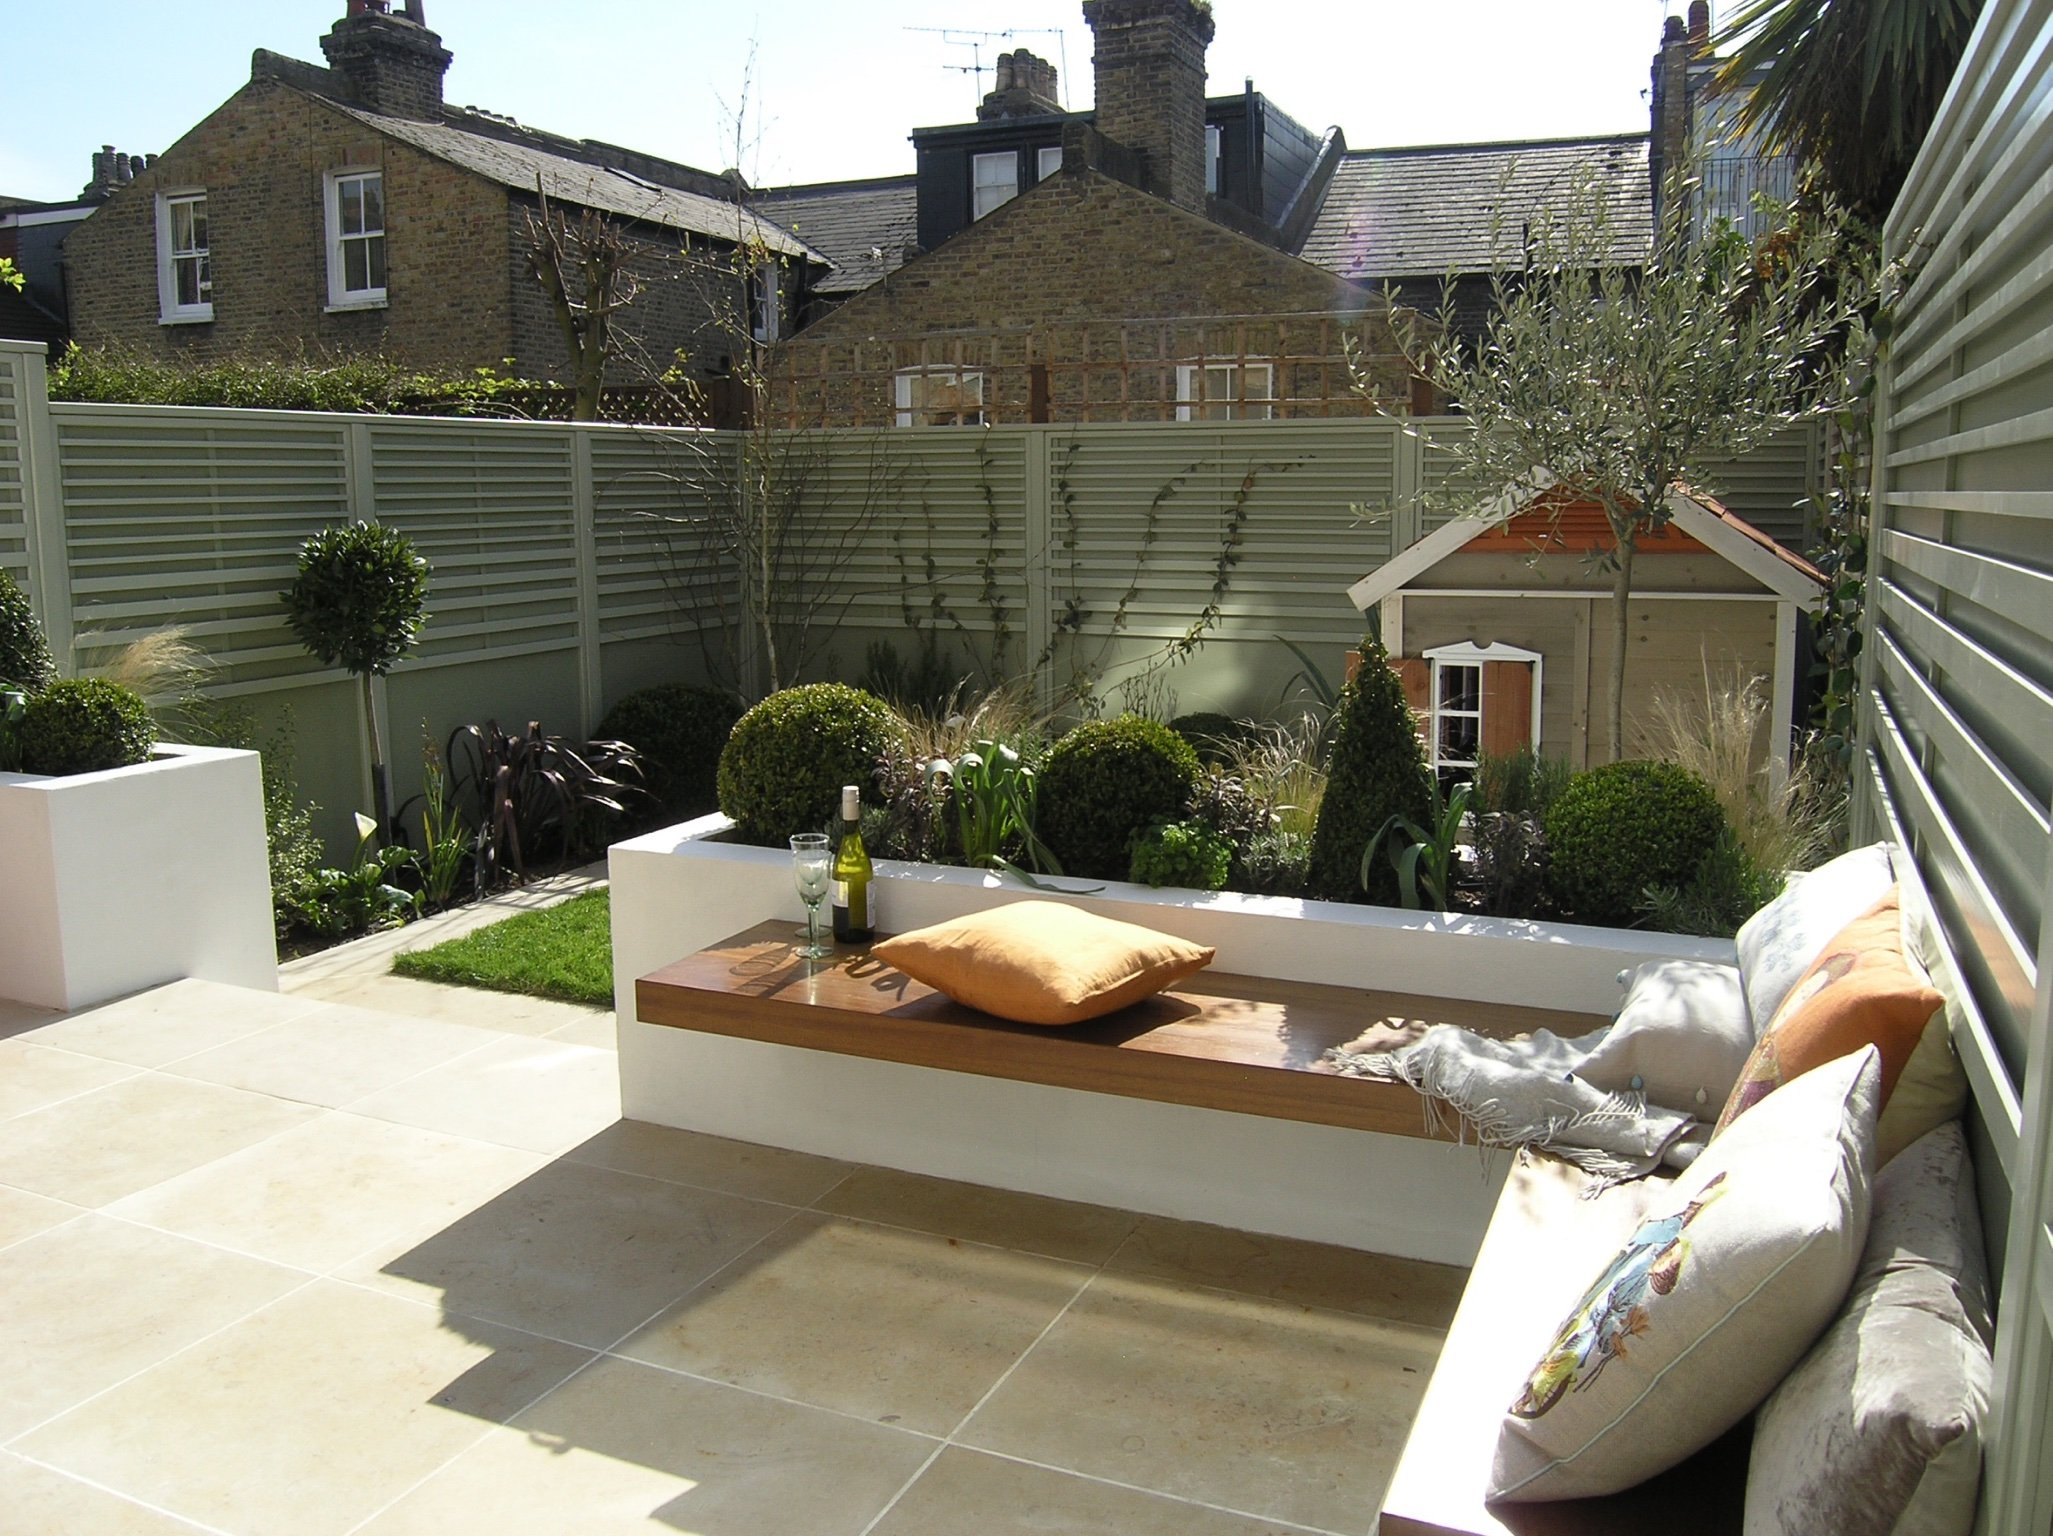 Child friendly London garden design and landscaping with bespoke seating area